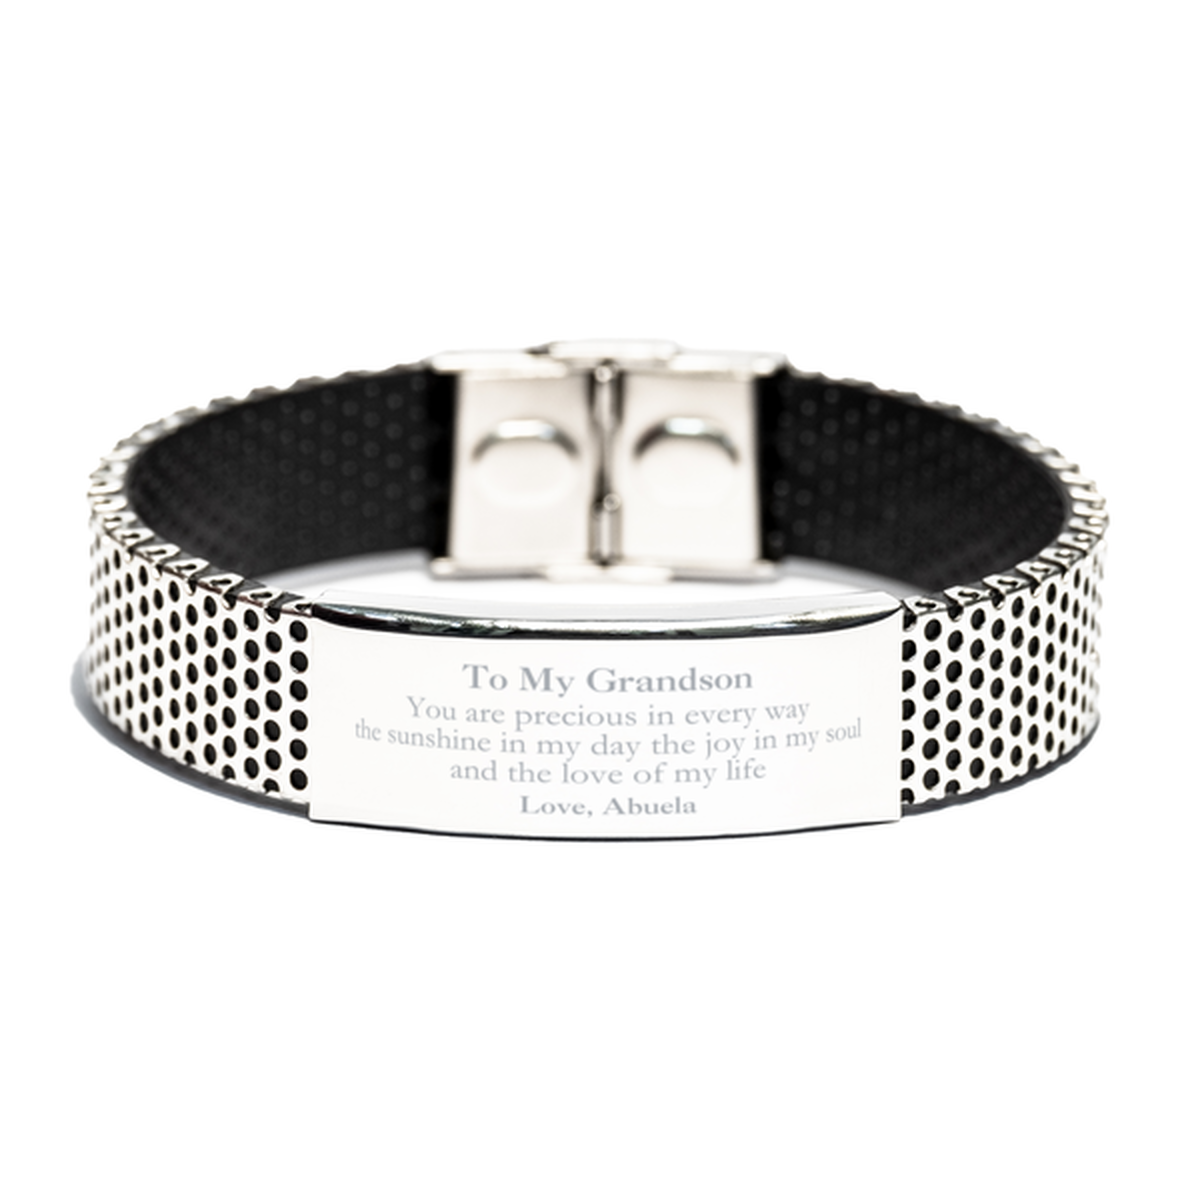 Graduation Gifts for Grandson Stainless Steel Bracelet Present from Abuela, Christmas Grandson Birthday Gifts Grandson You are precious in every way the sunshine in my day. Love, Abuela